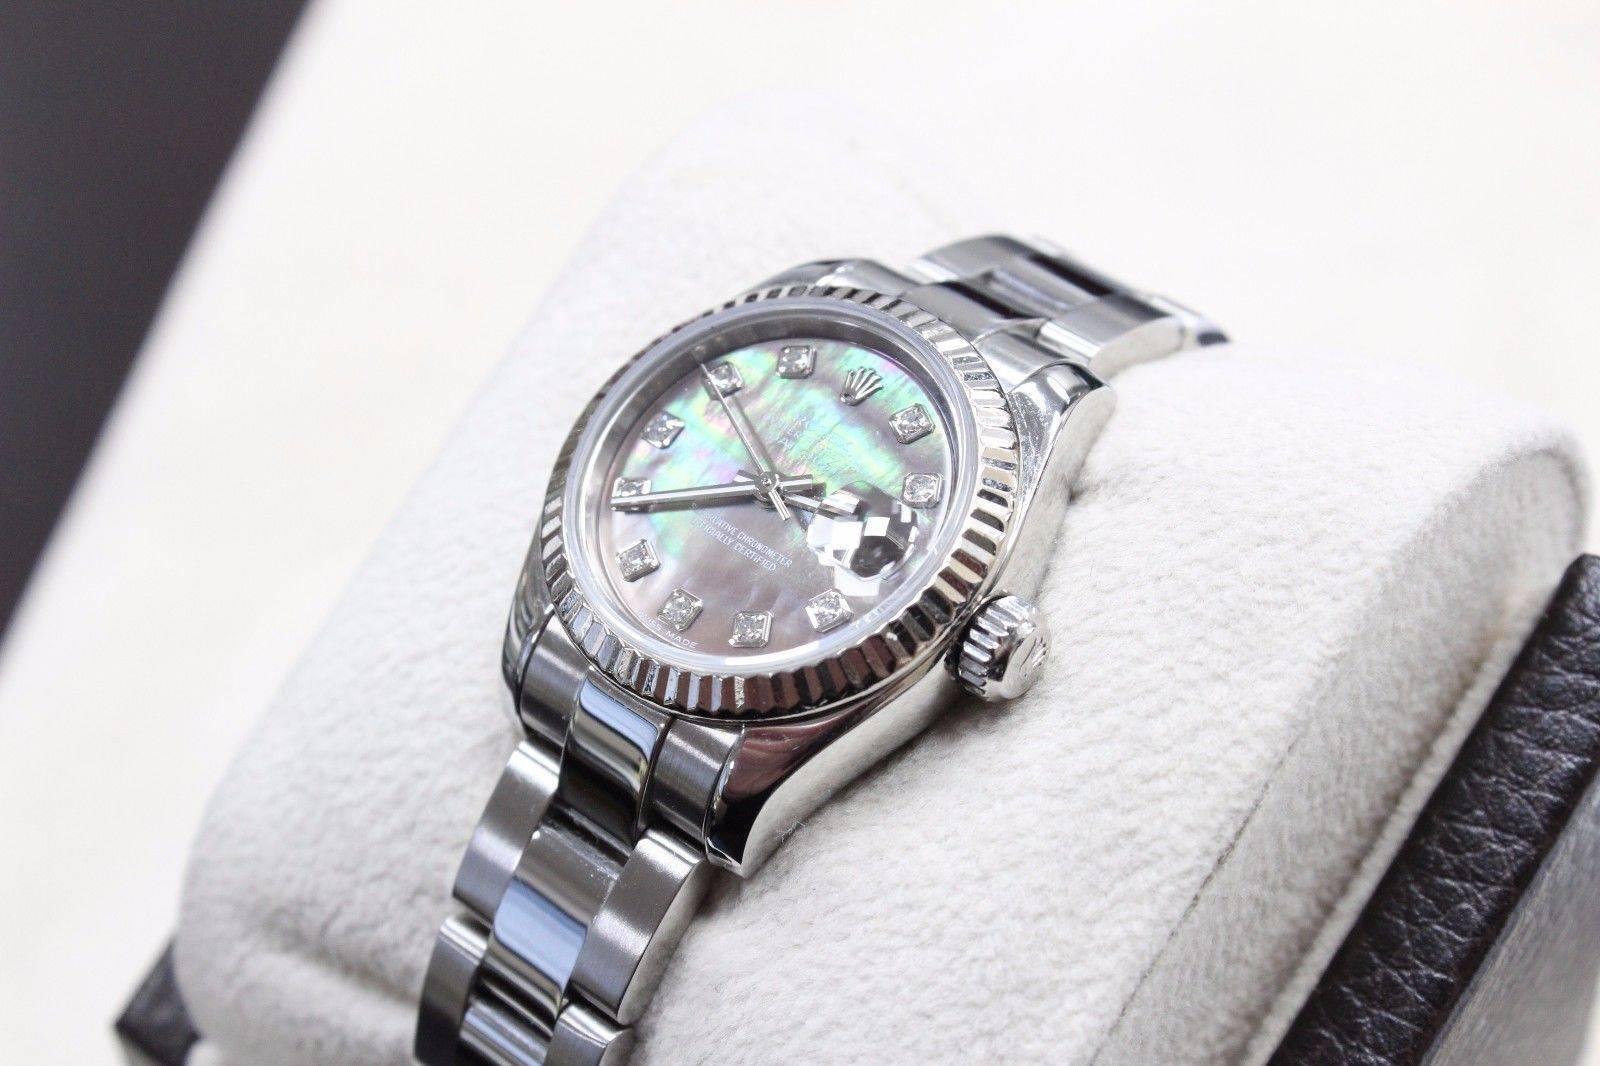 Style Number: 179174
Serial: D327***
Year: 2005
Model: Datejust
Case: Stainless Steel
Band: Stainless Steel
Bezel: 18K White Gold
Dial: Original Tahitian Mother of Pearl Diamond Dial
Face: Sapphire Crystal
Case Size: 26MM
Includes: 
-Rolex Box &